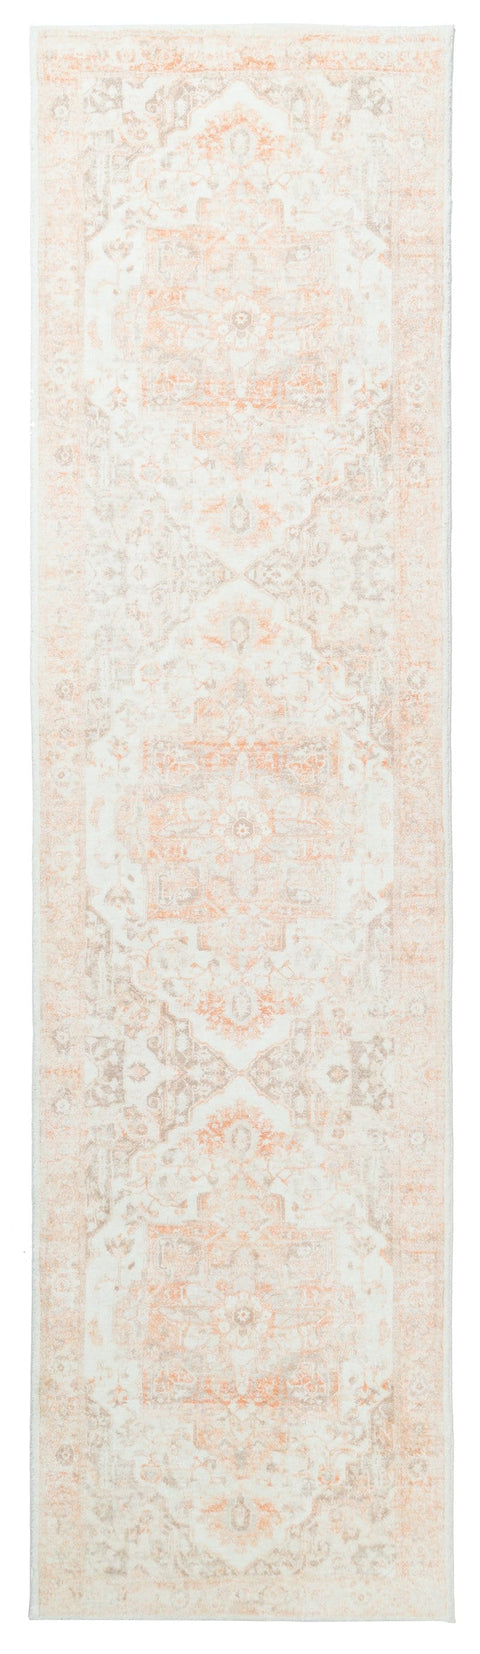 Theodora Orange and Beige Distressed Washable Runner Rug*NO RETURNS UNLESS FAULTY